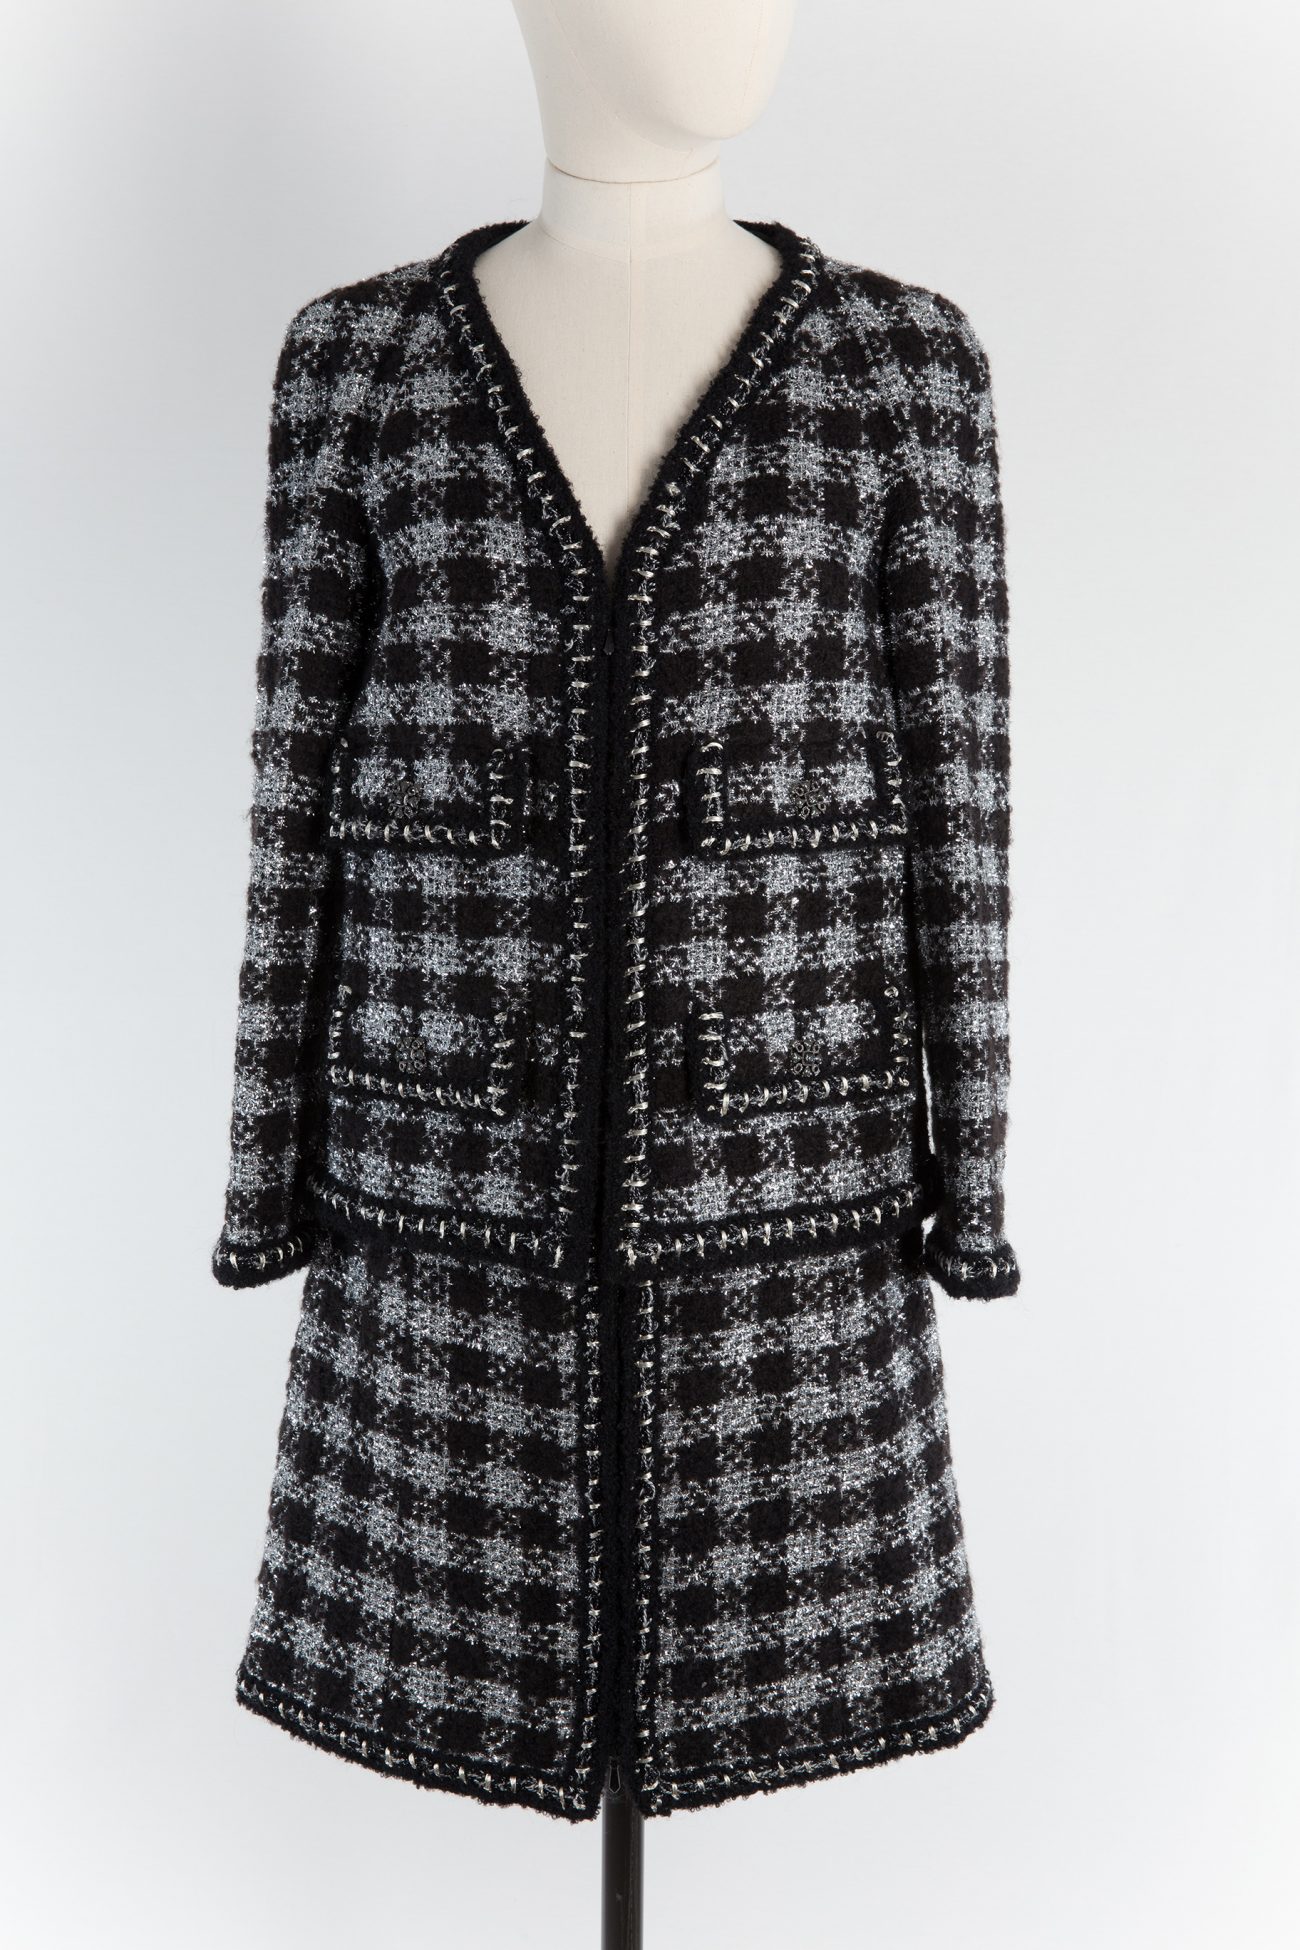 Chanel Jacket and Skirt, FR36 - Huntessa Luxury Online Consignment Boutique